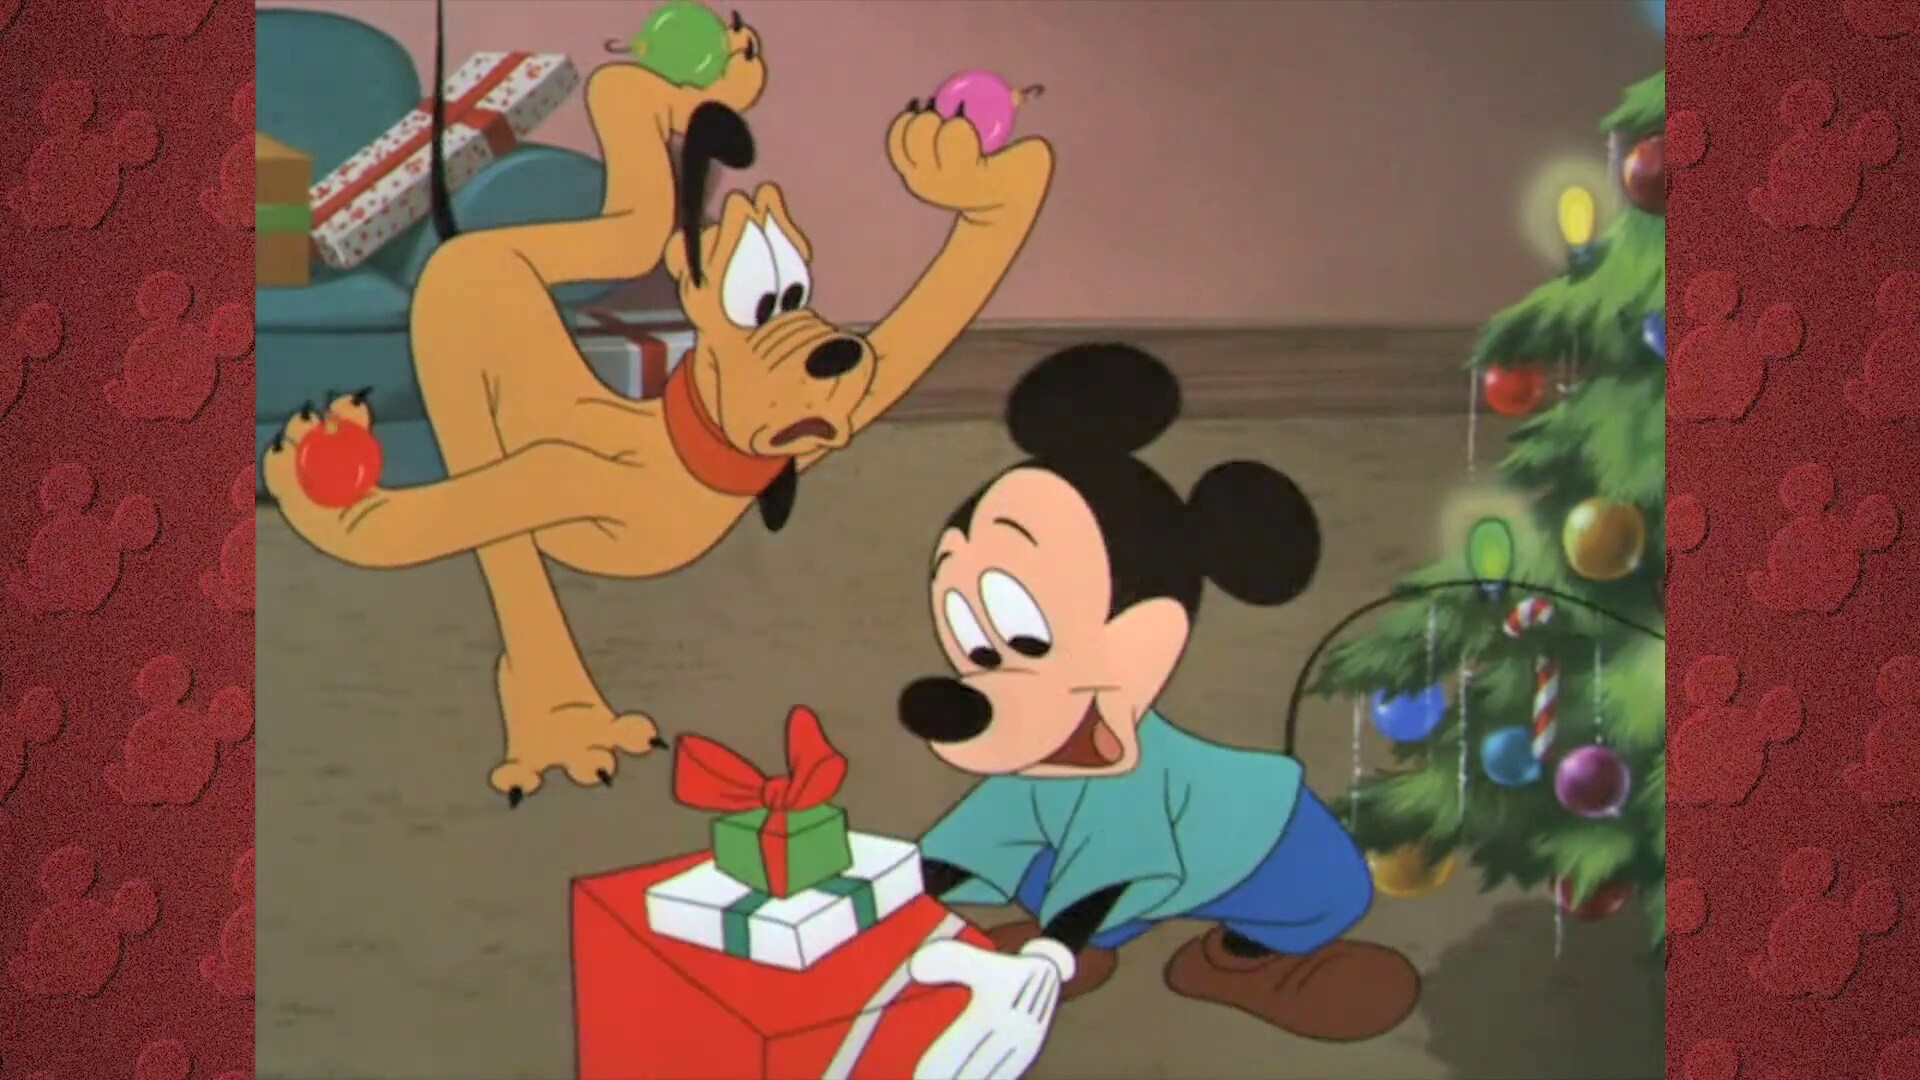 1-Minute of Holiday Magic from Mickey Mouse